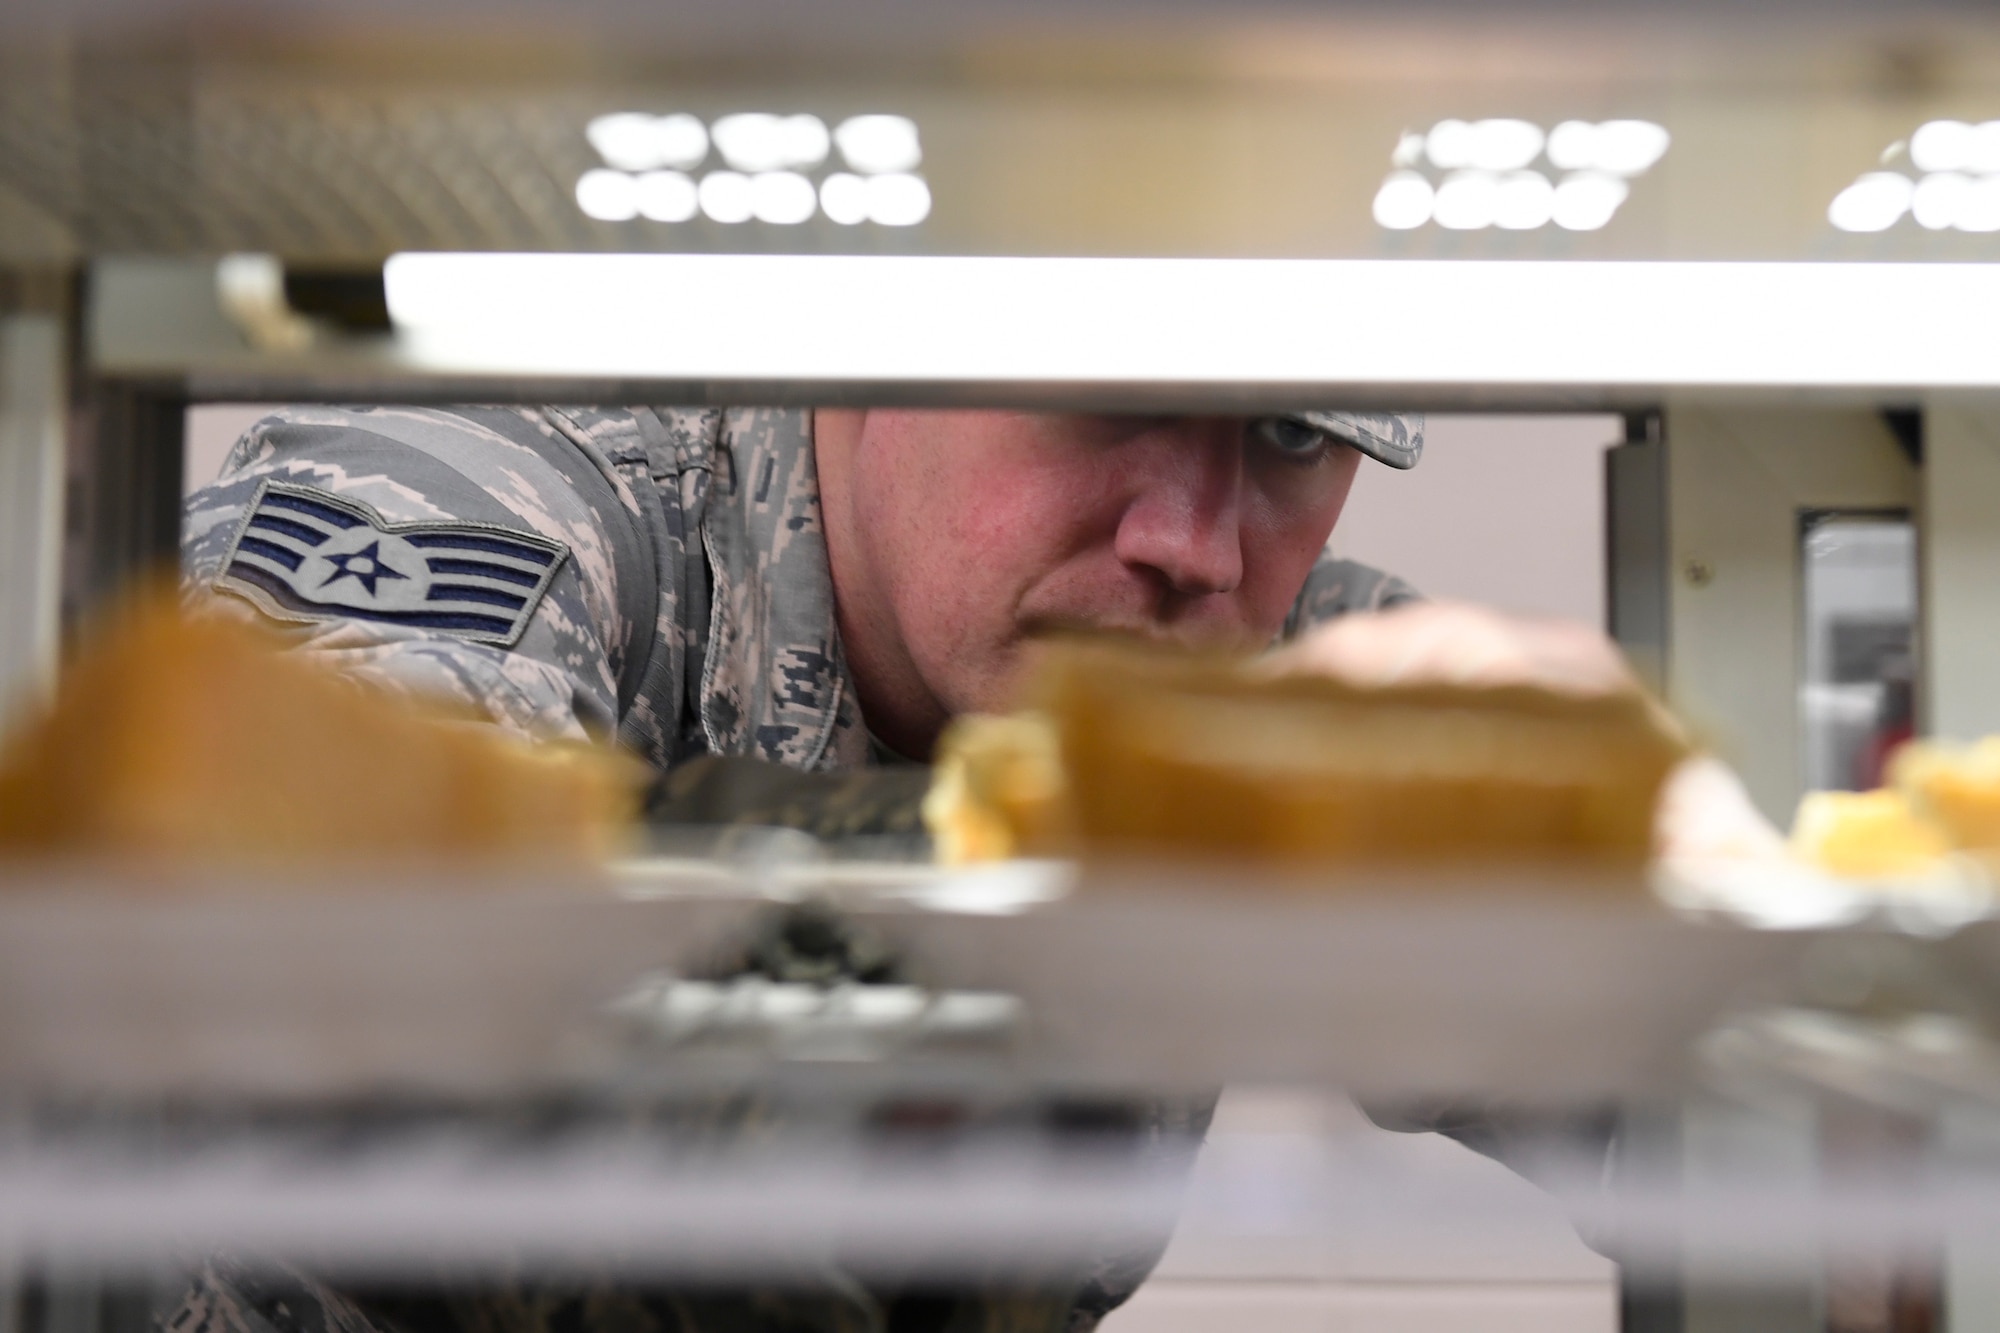 U.S. Air Force Staff Sgt. Jackson Hunt, 145th Force Support Squadron, places pumpkin pies in the display case for lunch in the dining facility during drill weekend at the North Carolina Air National Guard Base, Charlotte Douglas International Airport, Jan. 12, 2019. Food services Airmen from the North Carolina Air National Guard train members from the Niagara Falls Air Reserve Station, New York, on full-service kitchen operations in preparation for the upcoming Air Force active duty and reserve Hennessy Award competition.